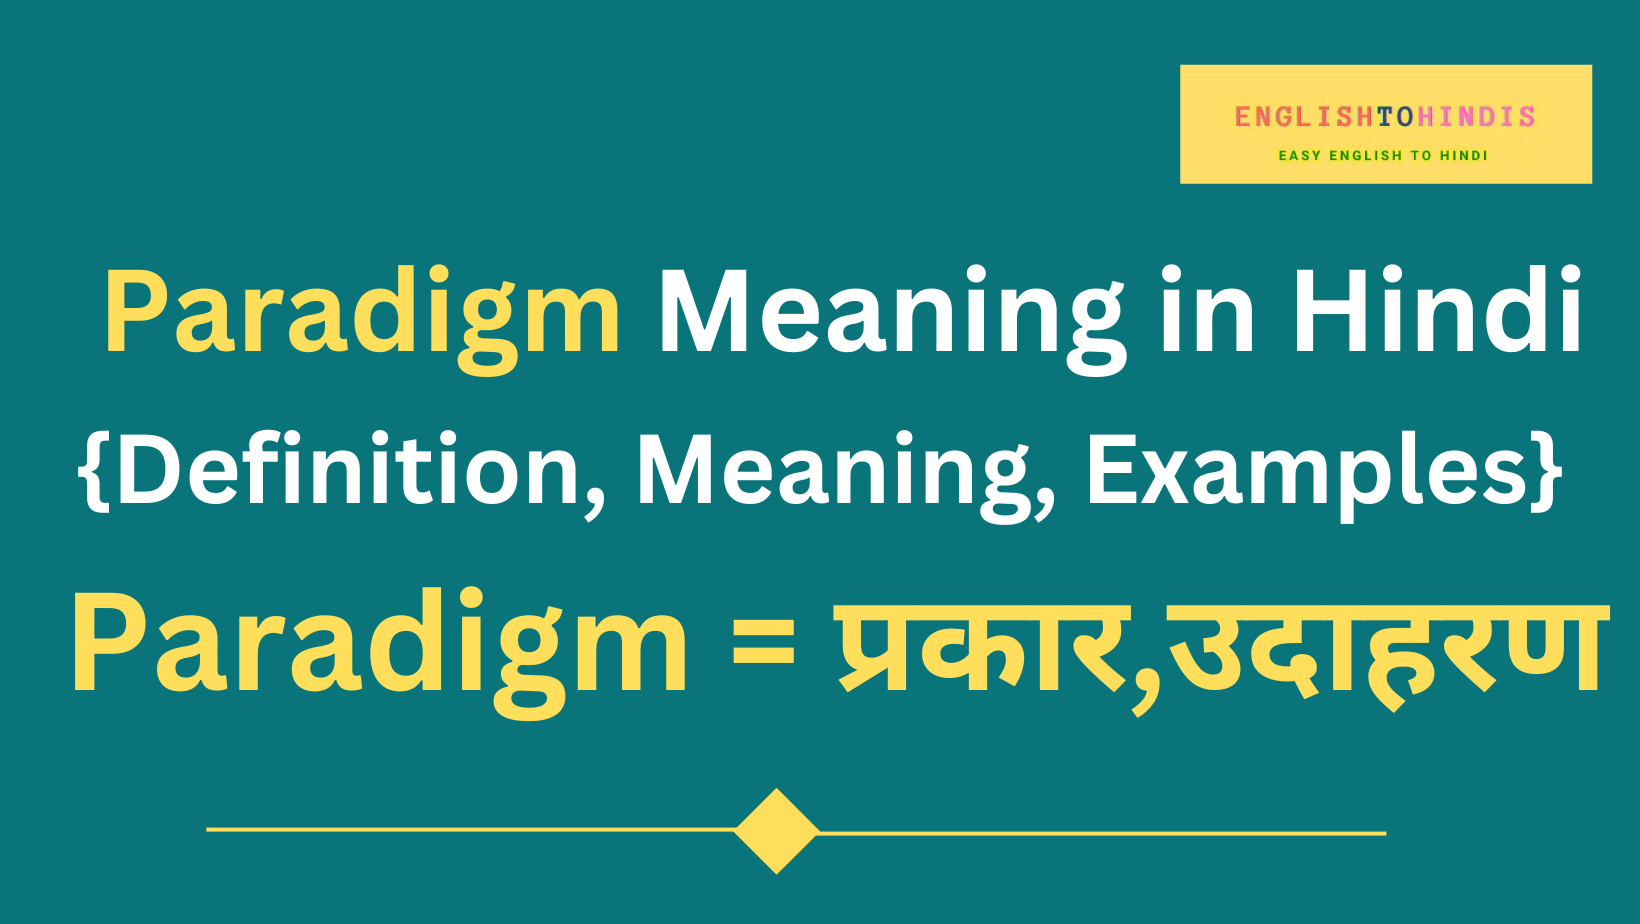 Paradigm Meaning in Hindi